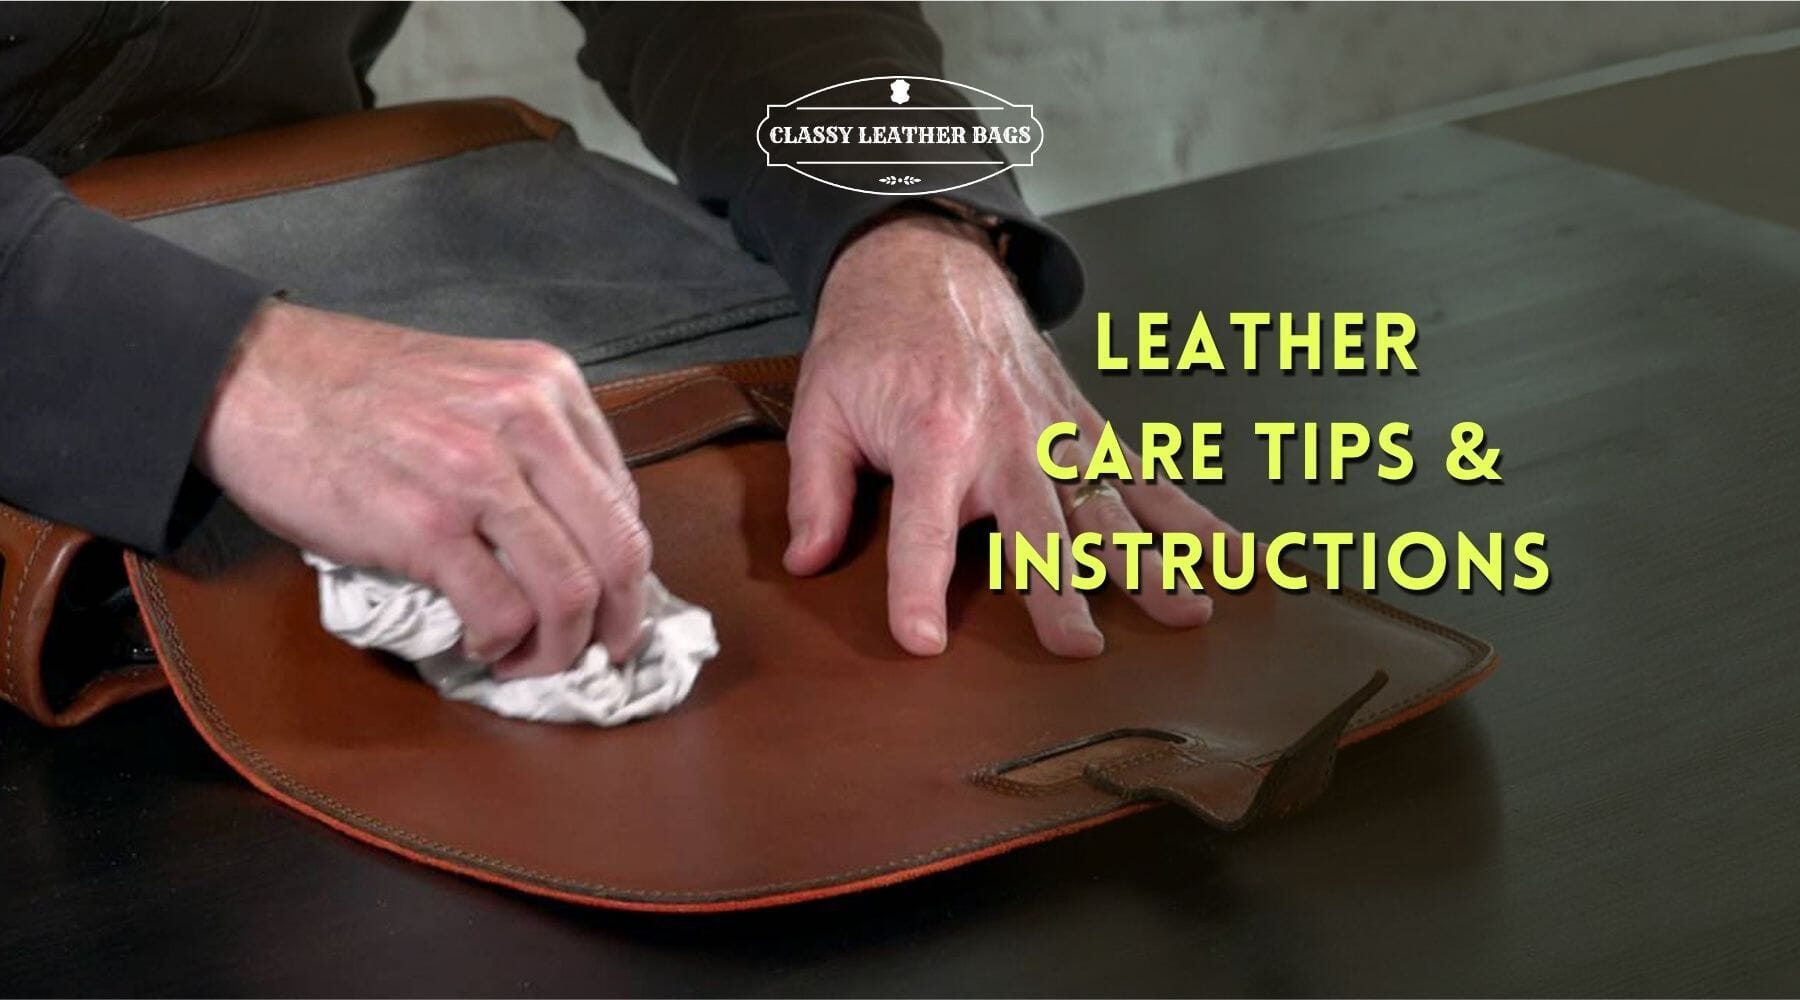 Leather Care Tips and Instructions for Leather Bags & Accessories